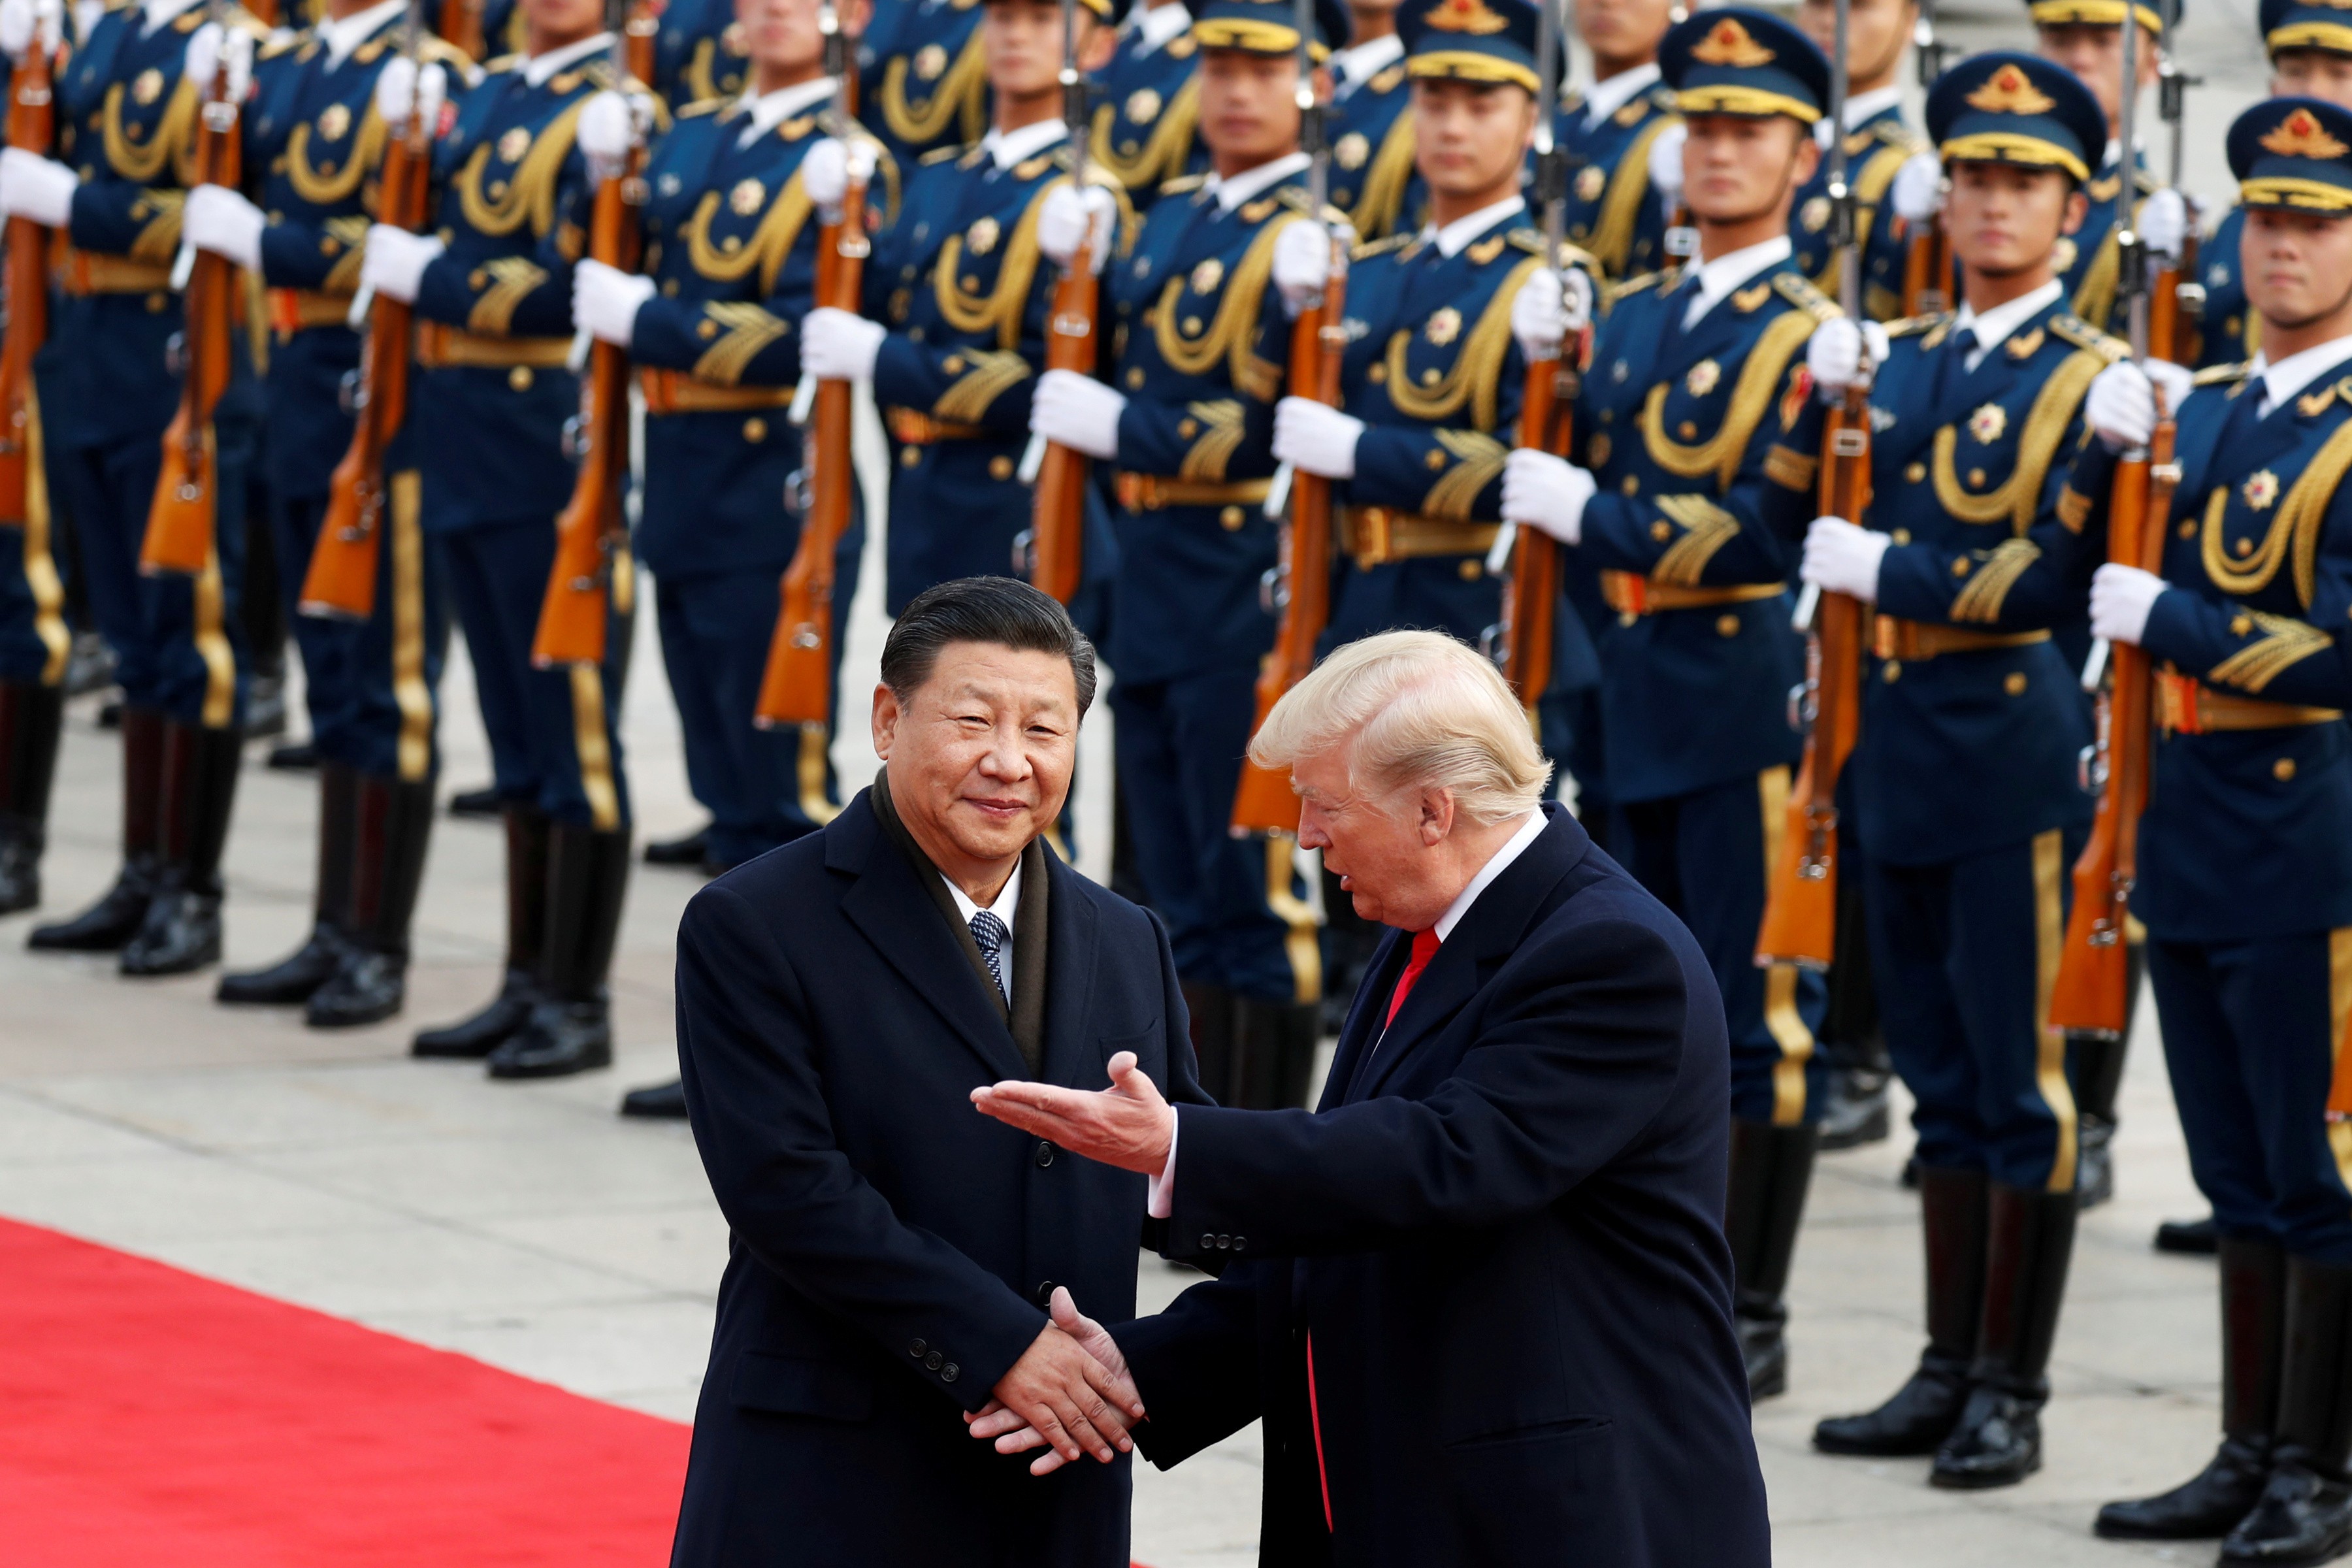 China’s President Xi Jinping and US President Donald Trump. Photo: Reuters